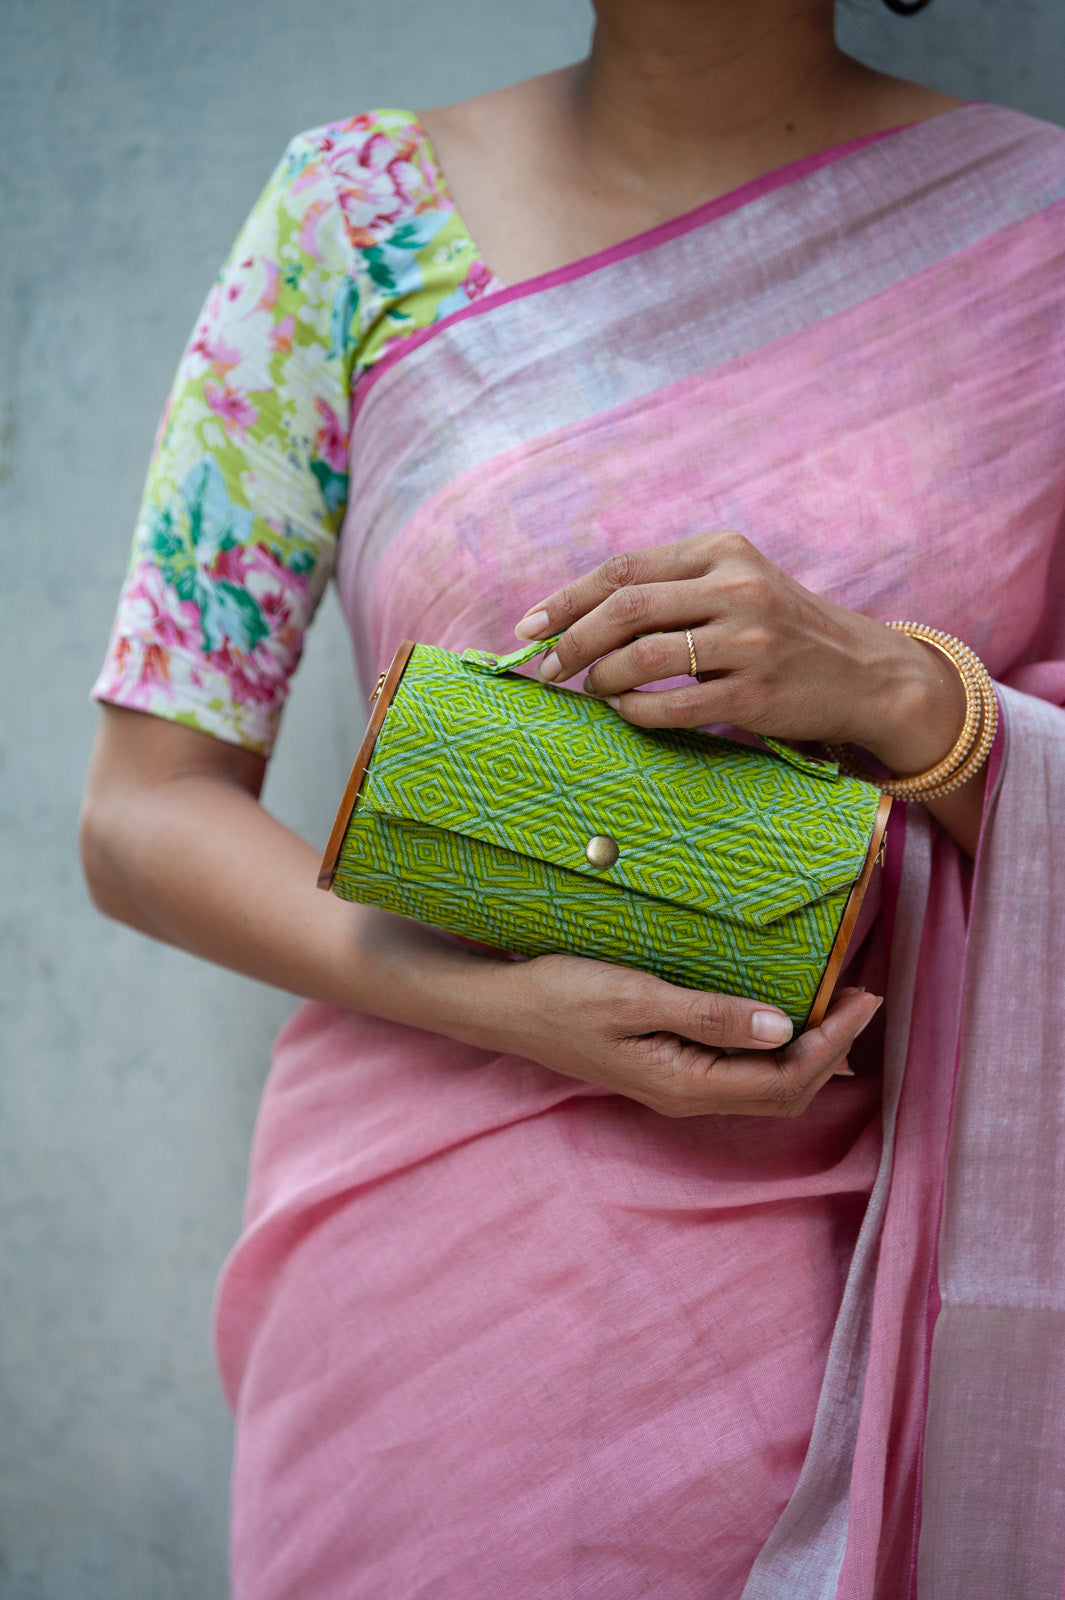 handcrafted round clutch comes with detachable sleeve, geometric Green pattern.